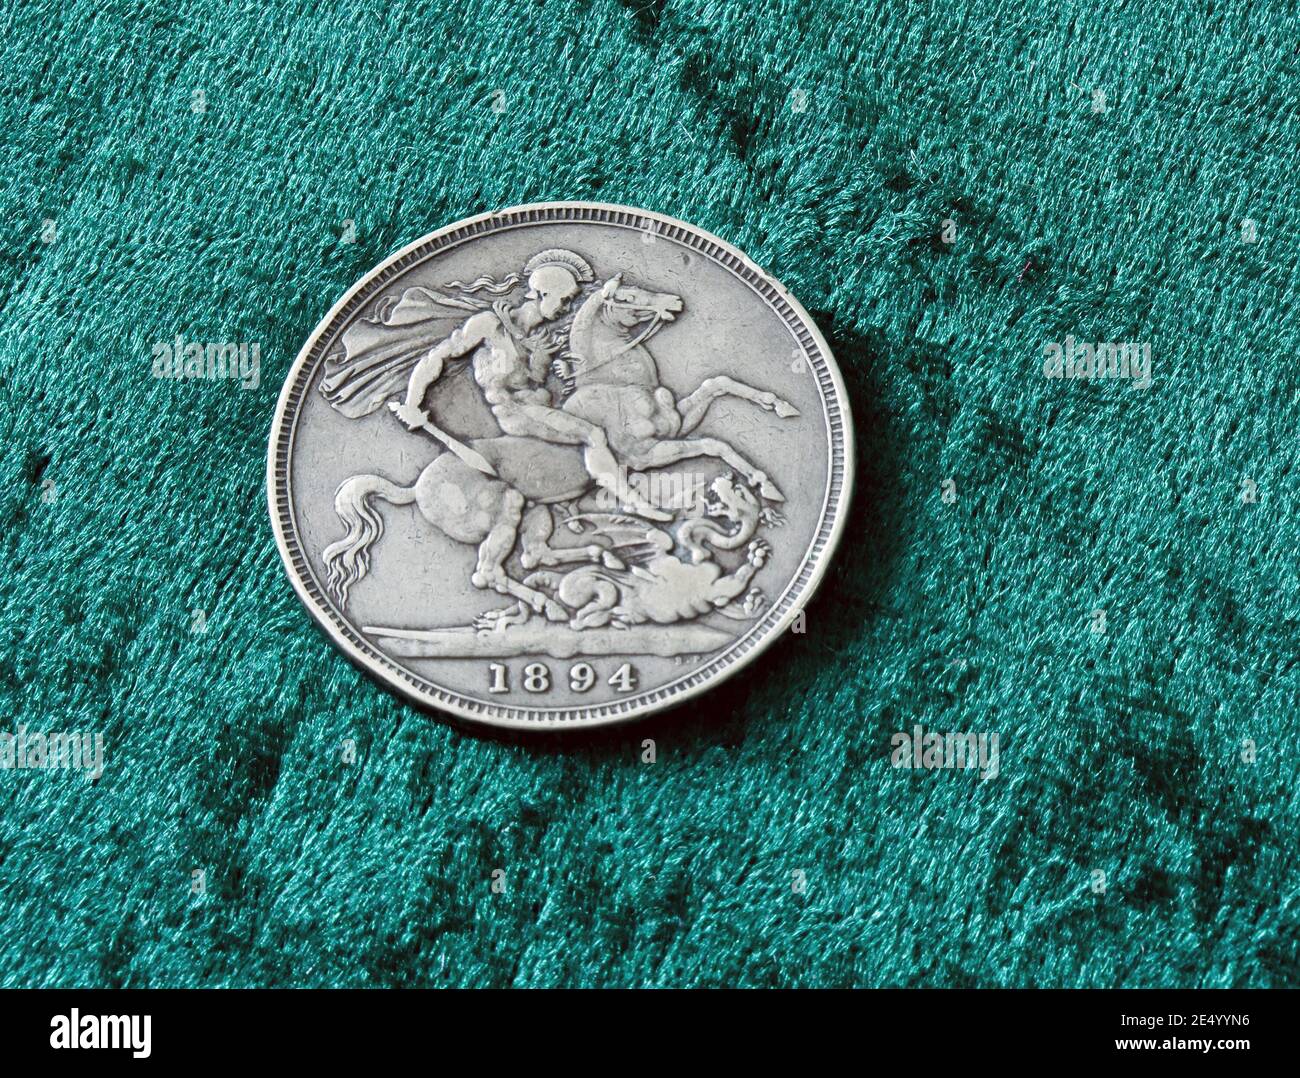 Reverse Side Of A Victorian 1894 Sterling Silver ( 92.5% ) British One Crown Coin Showing The George And The Dragon Design By Benedetto Pistrucci Stock Photo